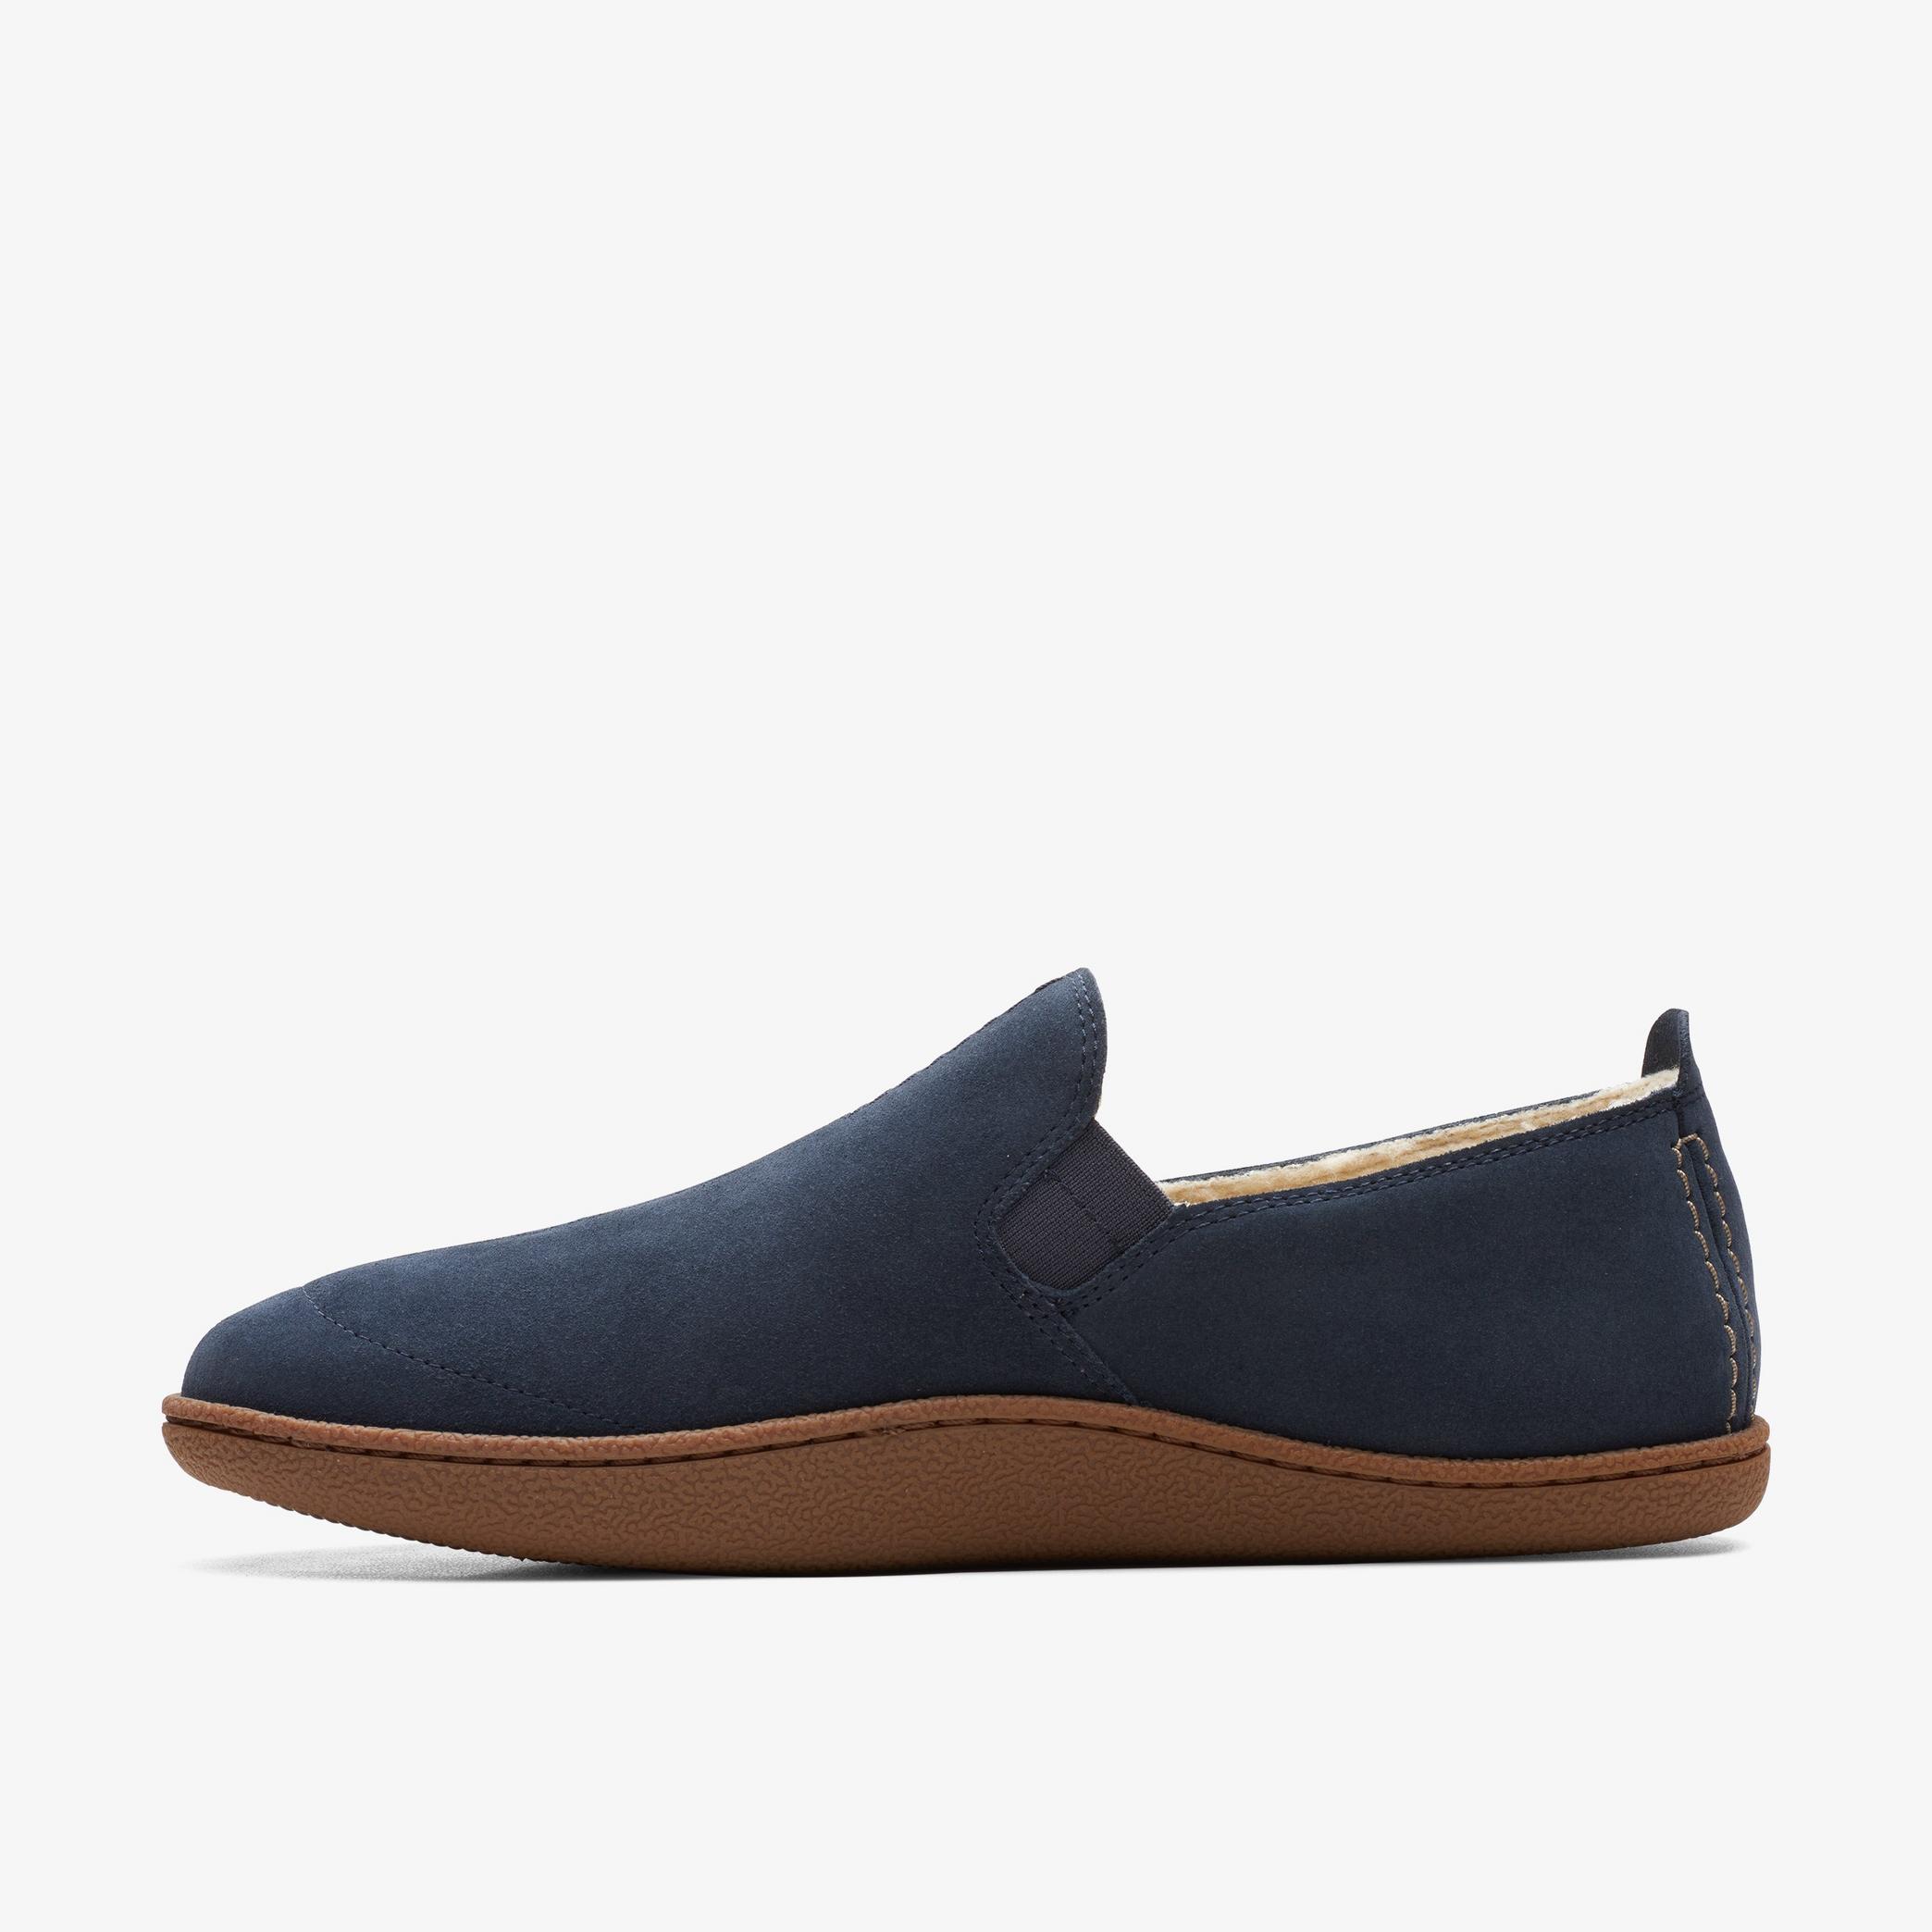 Home Mocc Navy Suede Slippers, view 2 of 6